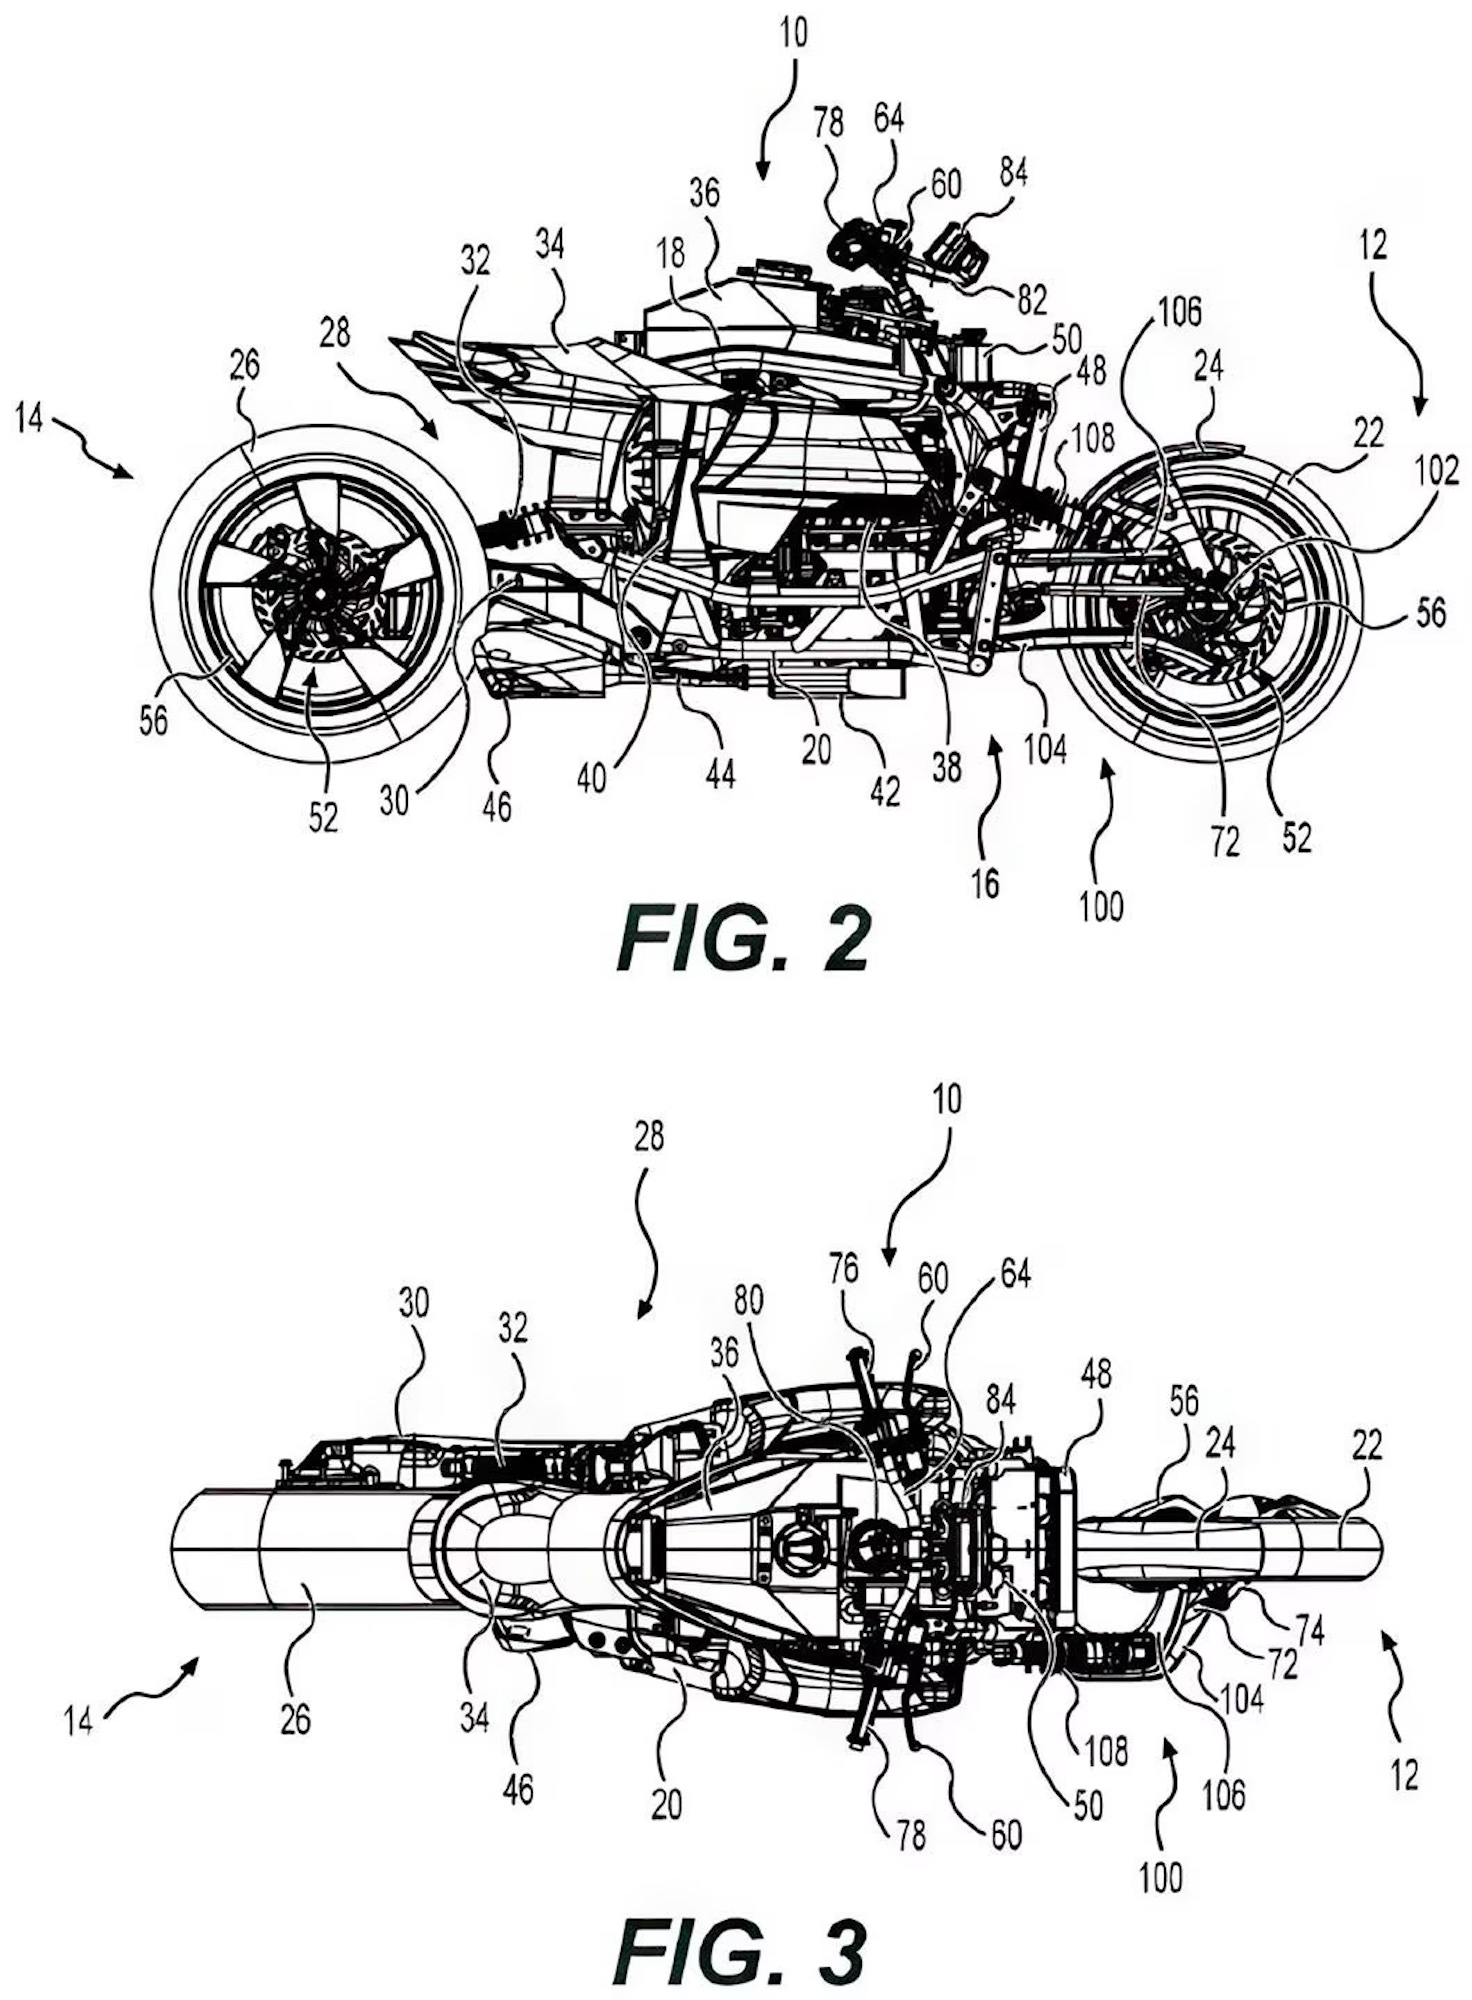 Patent images showing a hub-steering ICE bike underway in BRP's headquarters. Media sourced from CycleWorld.